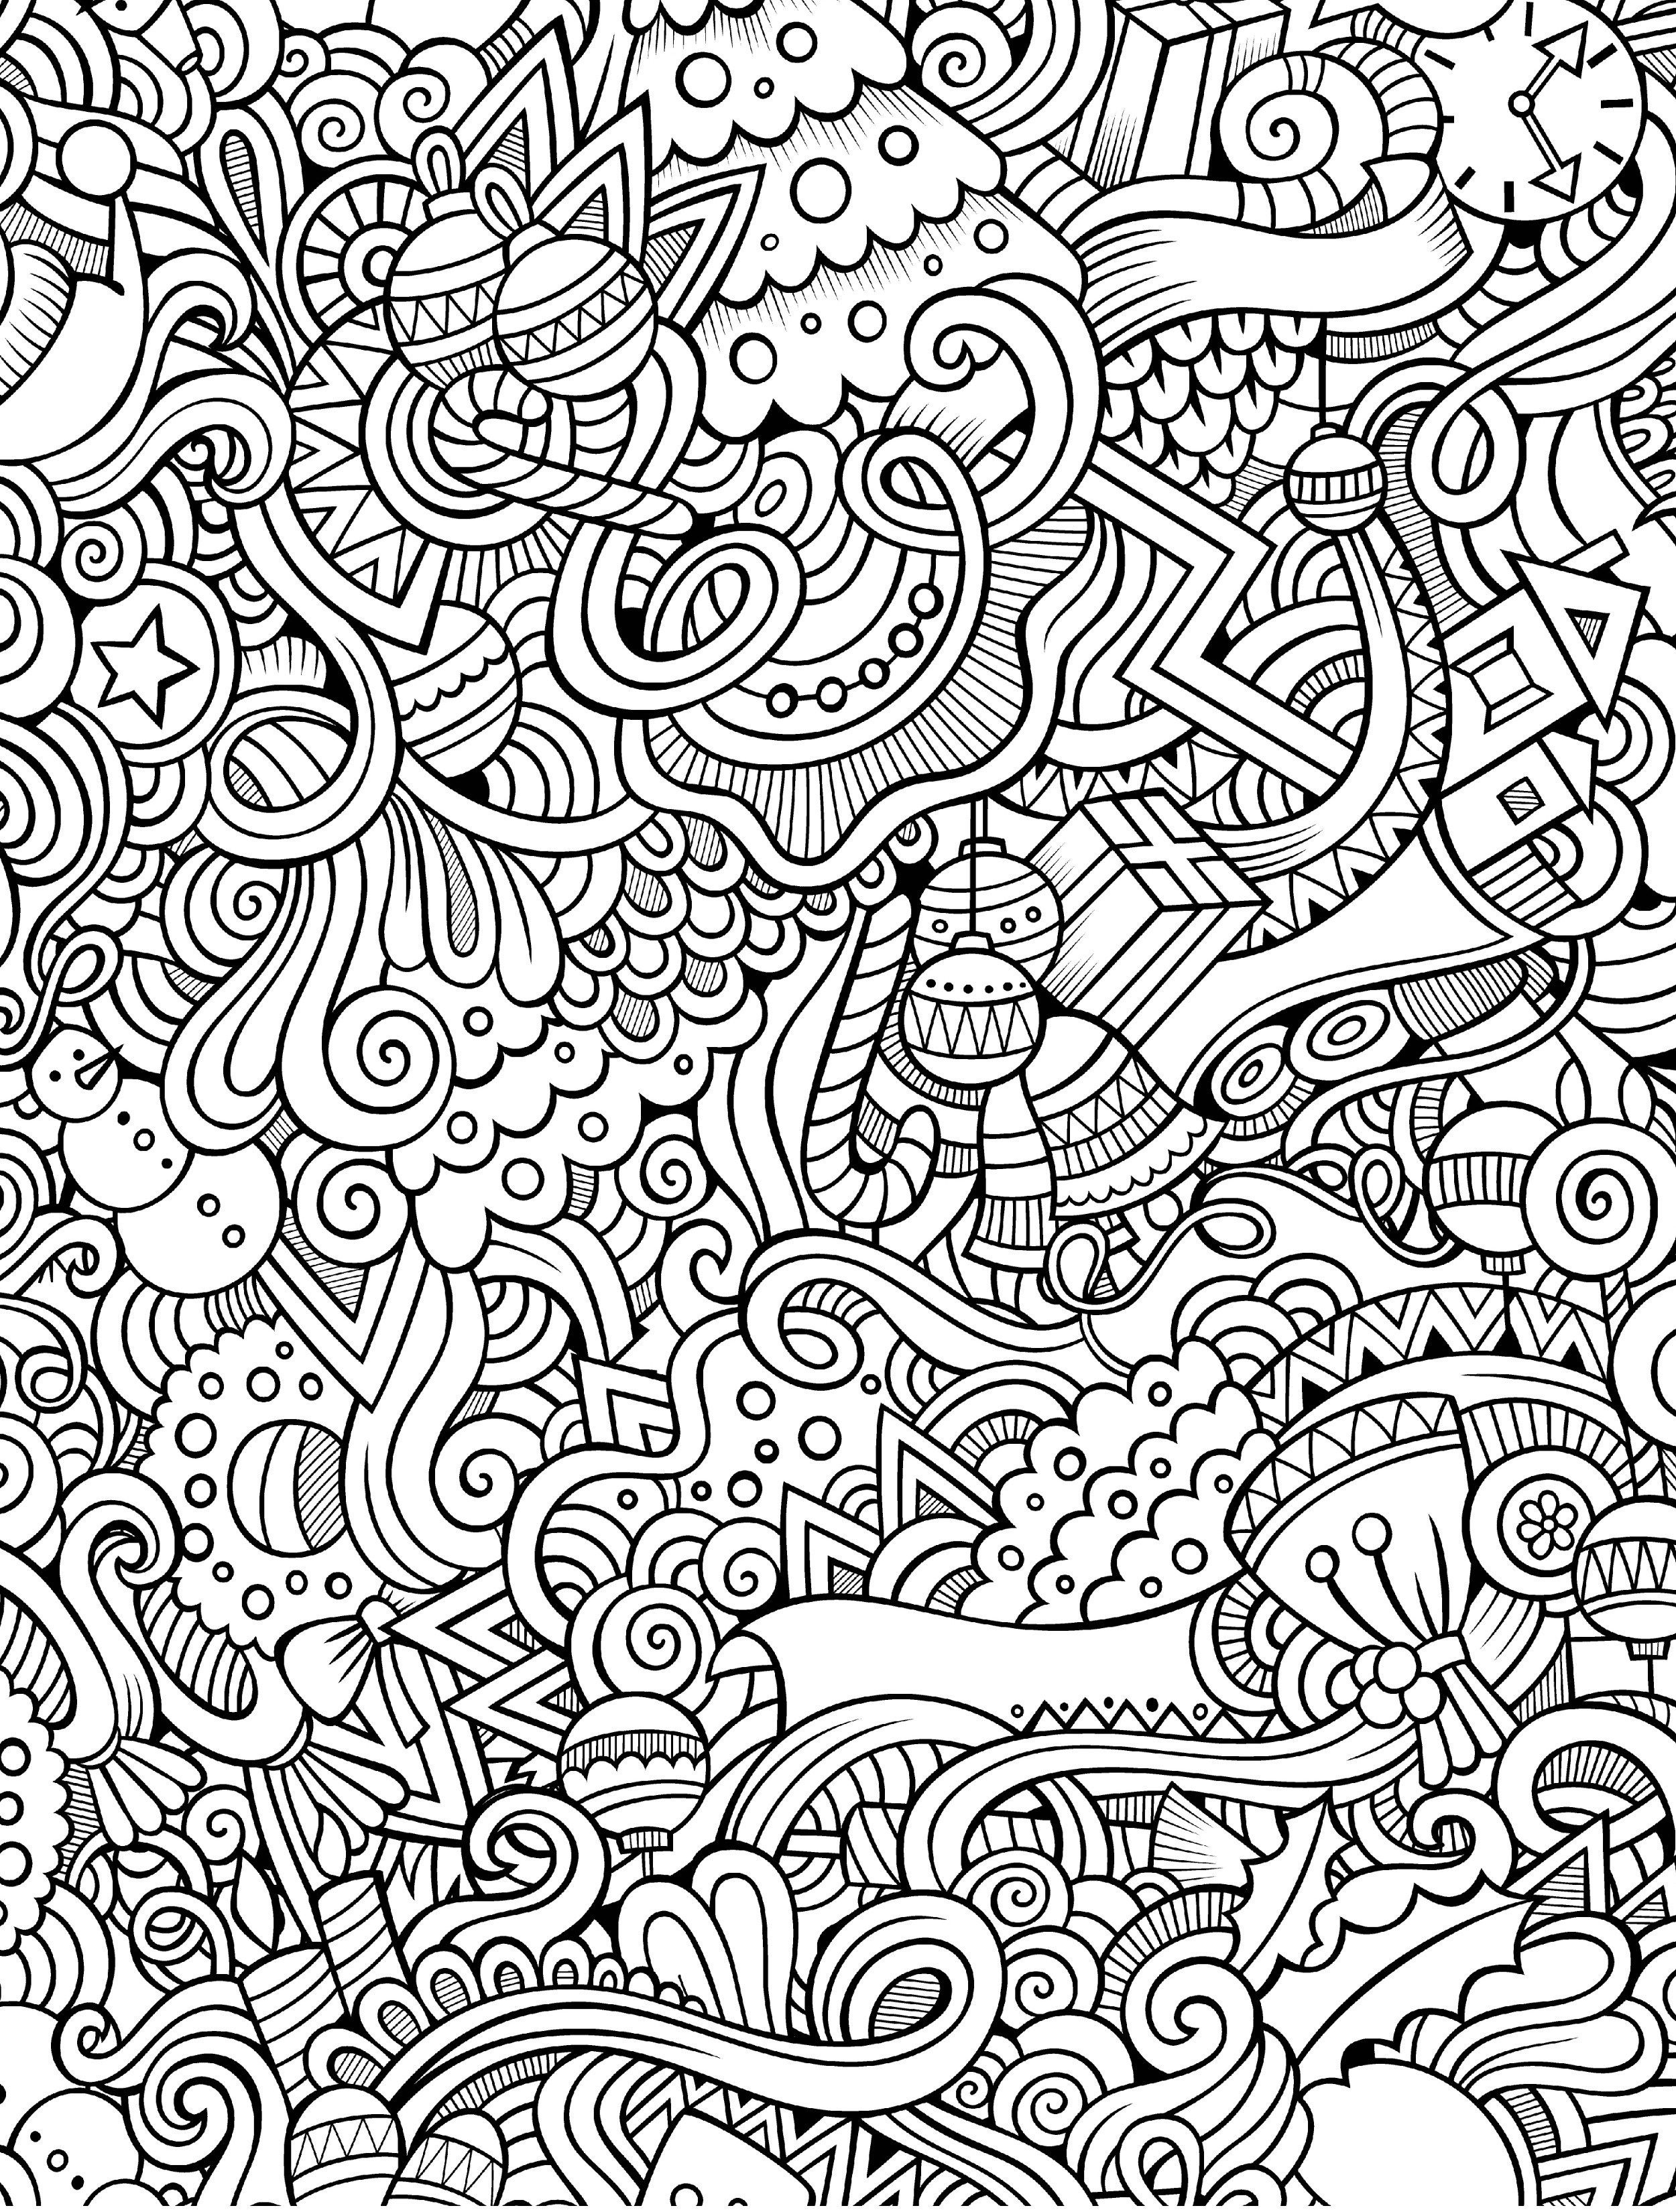 10 Free Printable Holiday Adult Coloring Pages | Coloring Pages - Free Printable Doodle Patterns